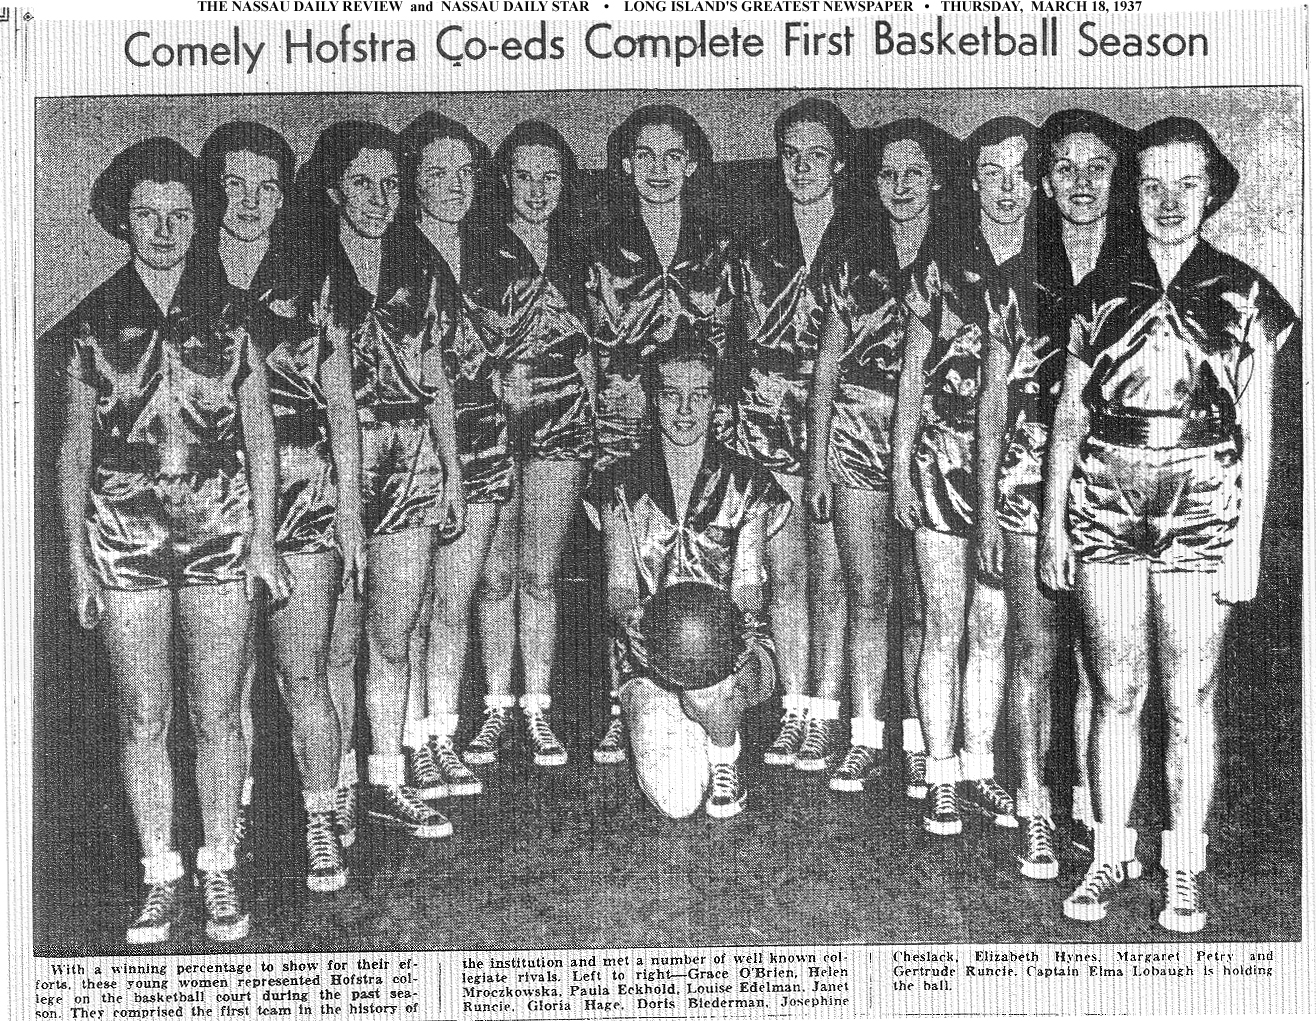 Comely Hofstra Co-Eds Complete First Basketball Season. From The Nassau Daily Review and Nassau Daily Star, March 18, 1937. Text: With a winning percentage to show for their efforts, these young women represented Hofstra college on the basketball court during the past season. They comprised the first team in the history of the institution and met a number of well known collegiate rivals. Left to right---Grace O'Brien, Helen Mroczkowska, Paula Eckhold, Louis Edelman, Janet Runcie, Gloria Hage, Doris Biedermaan, Josephine Cheslack, Elizabeth Hynes, Margaret Petry and Gertrude Runcie. Captain Elma Lobaugh is holding the ball.